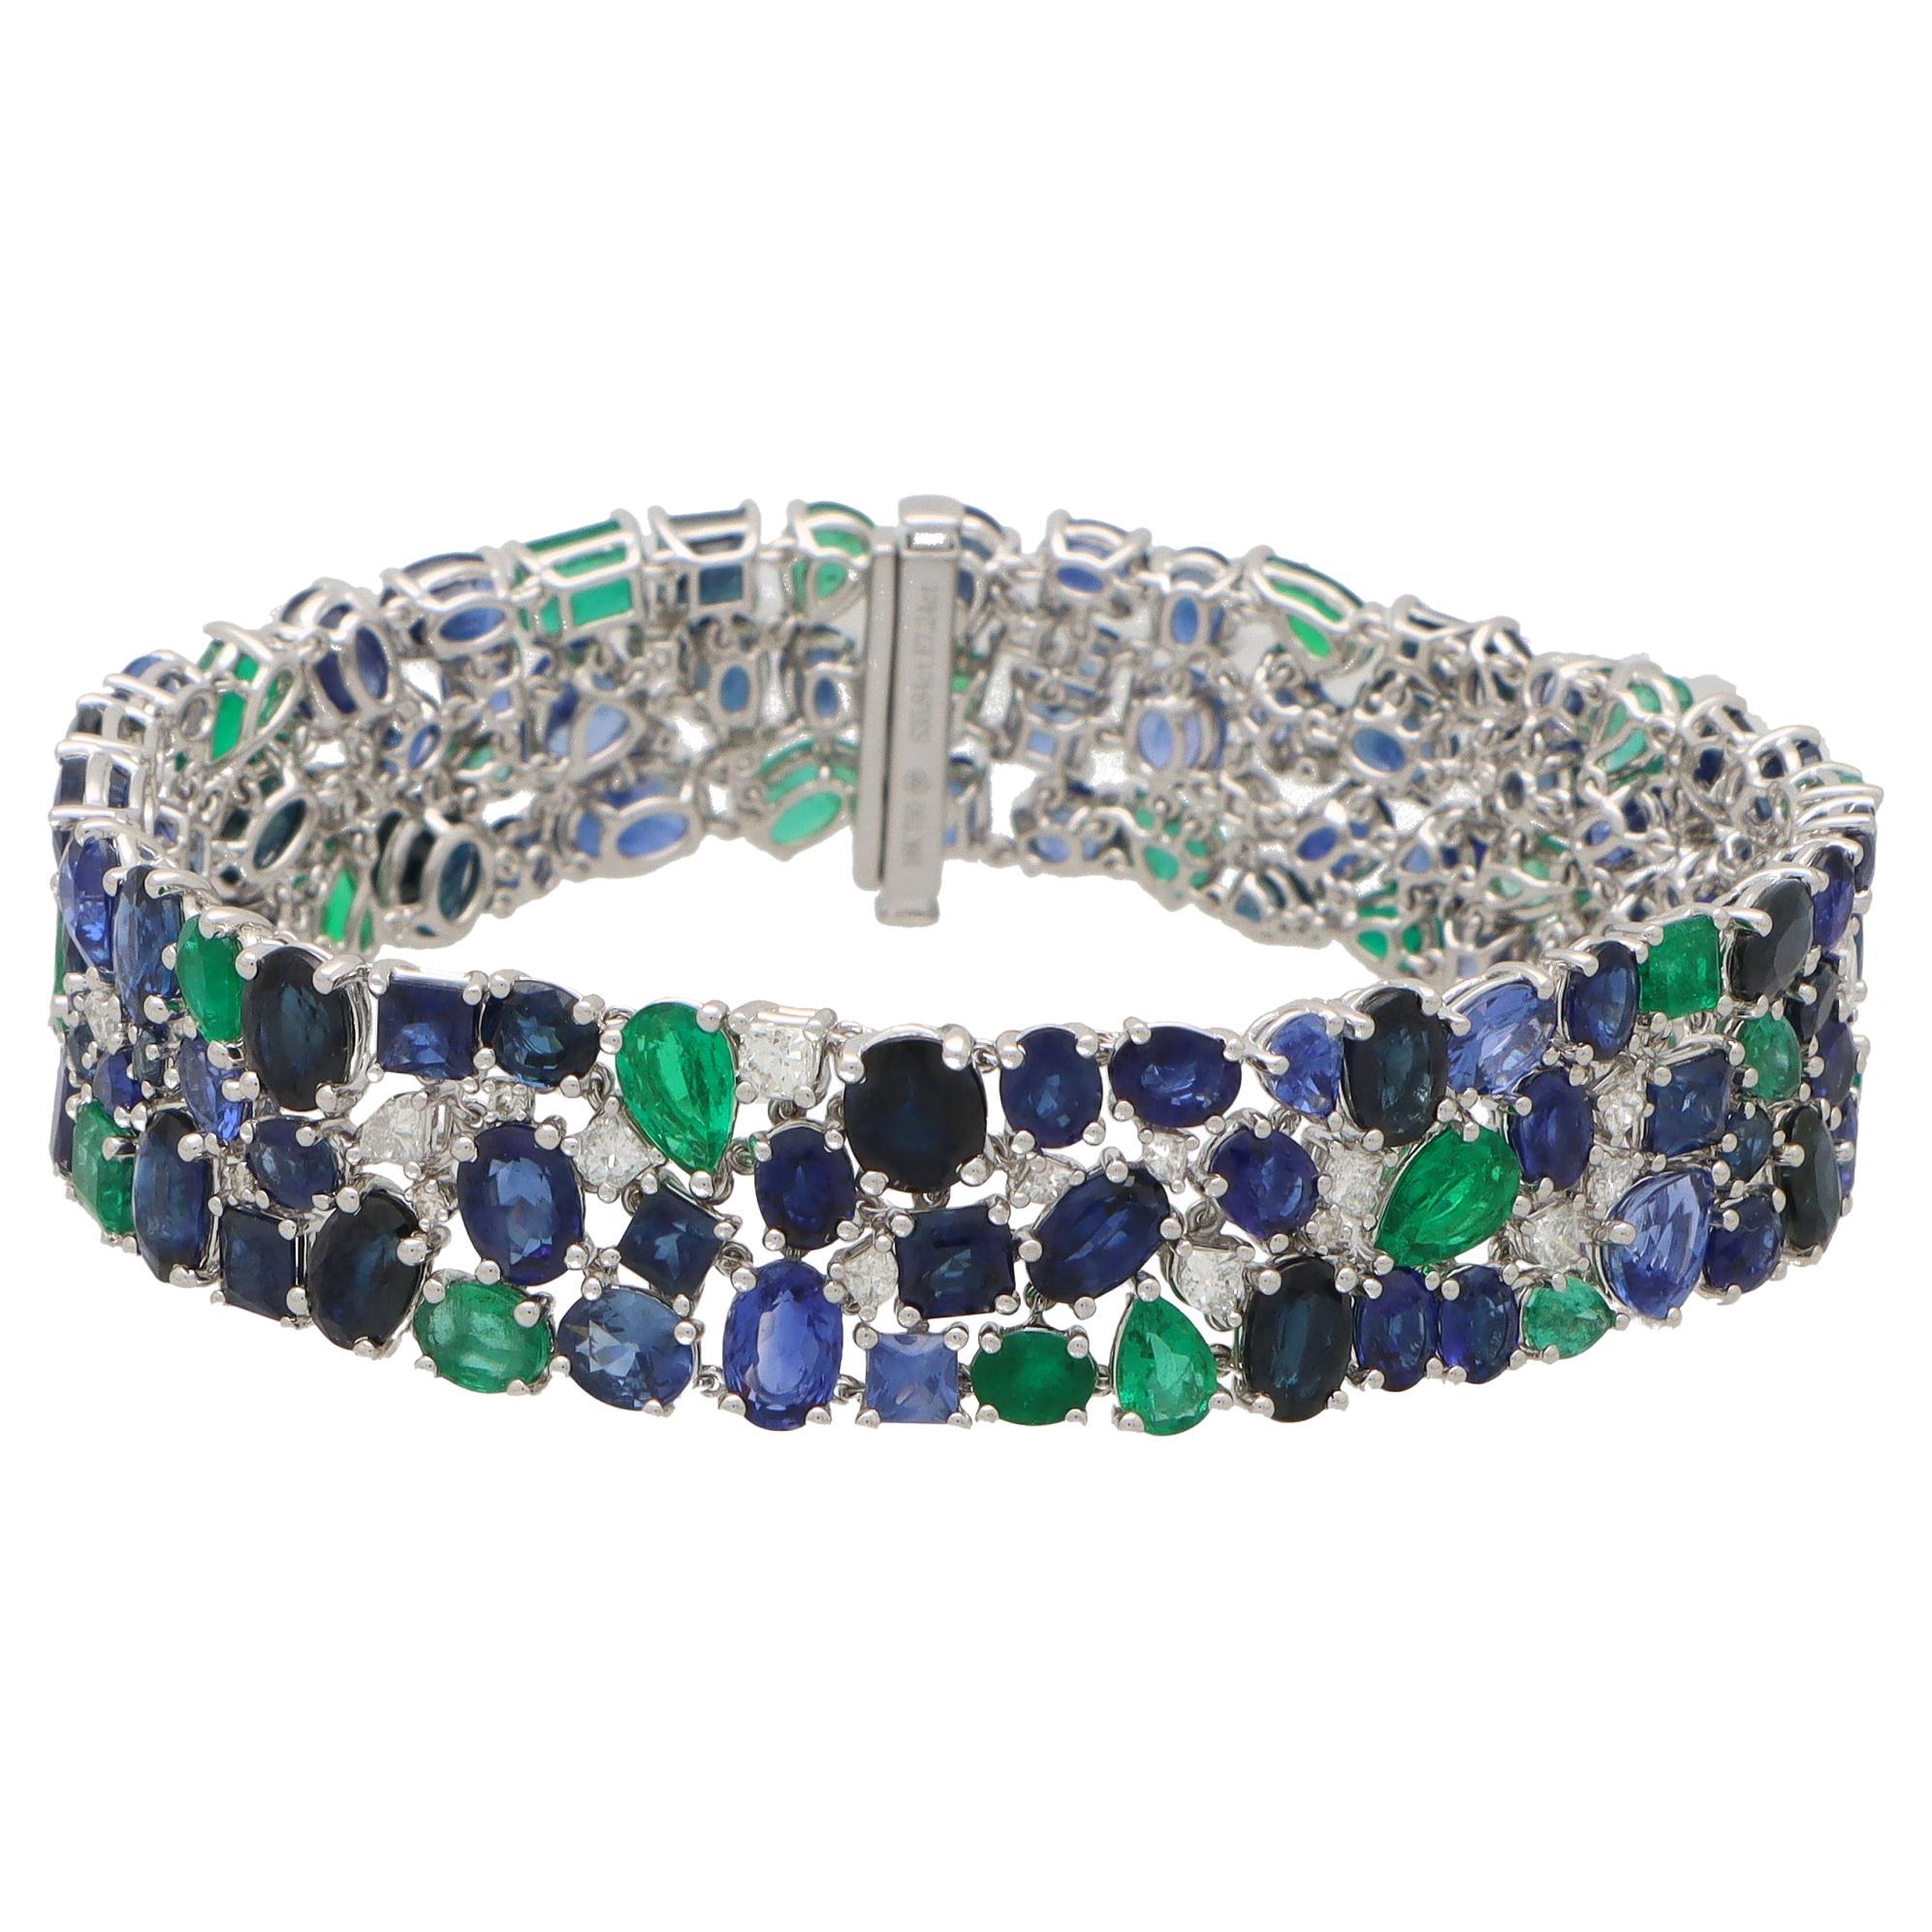 Contemporary Blue Sapphire, Emerald and Diamond Bracelet Set in 18k White Gold For Sale